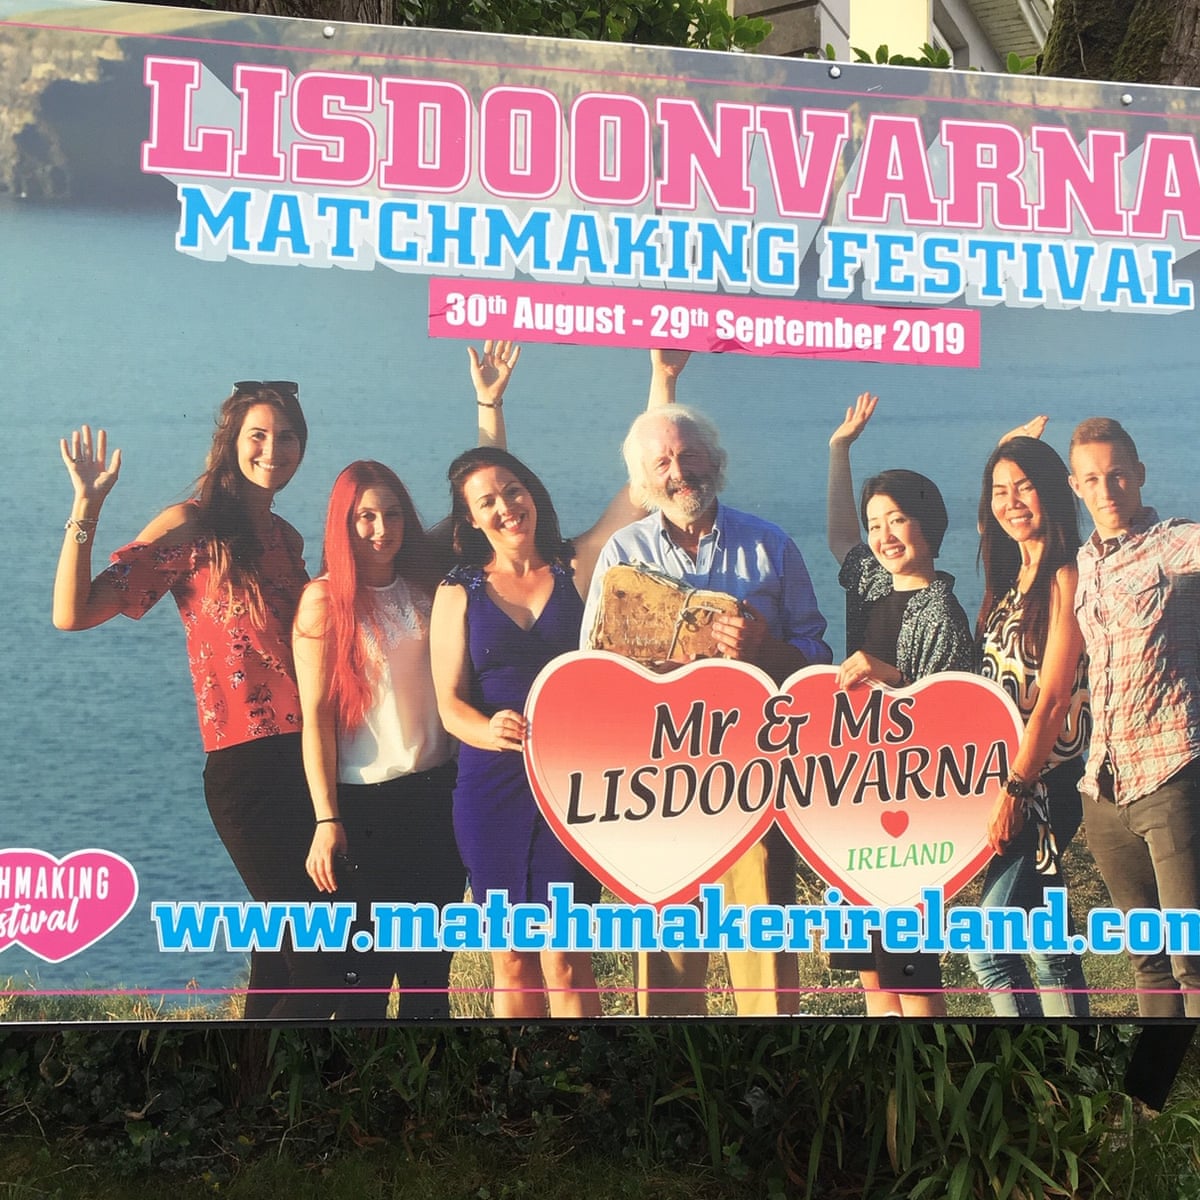 Matchmaking Festival | Singles | Dating | Willie Daly 